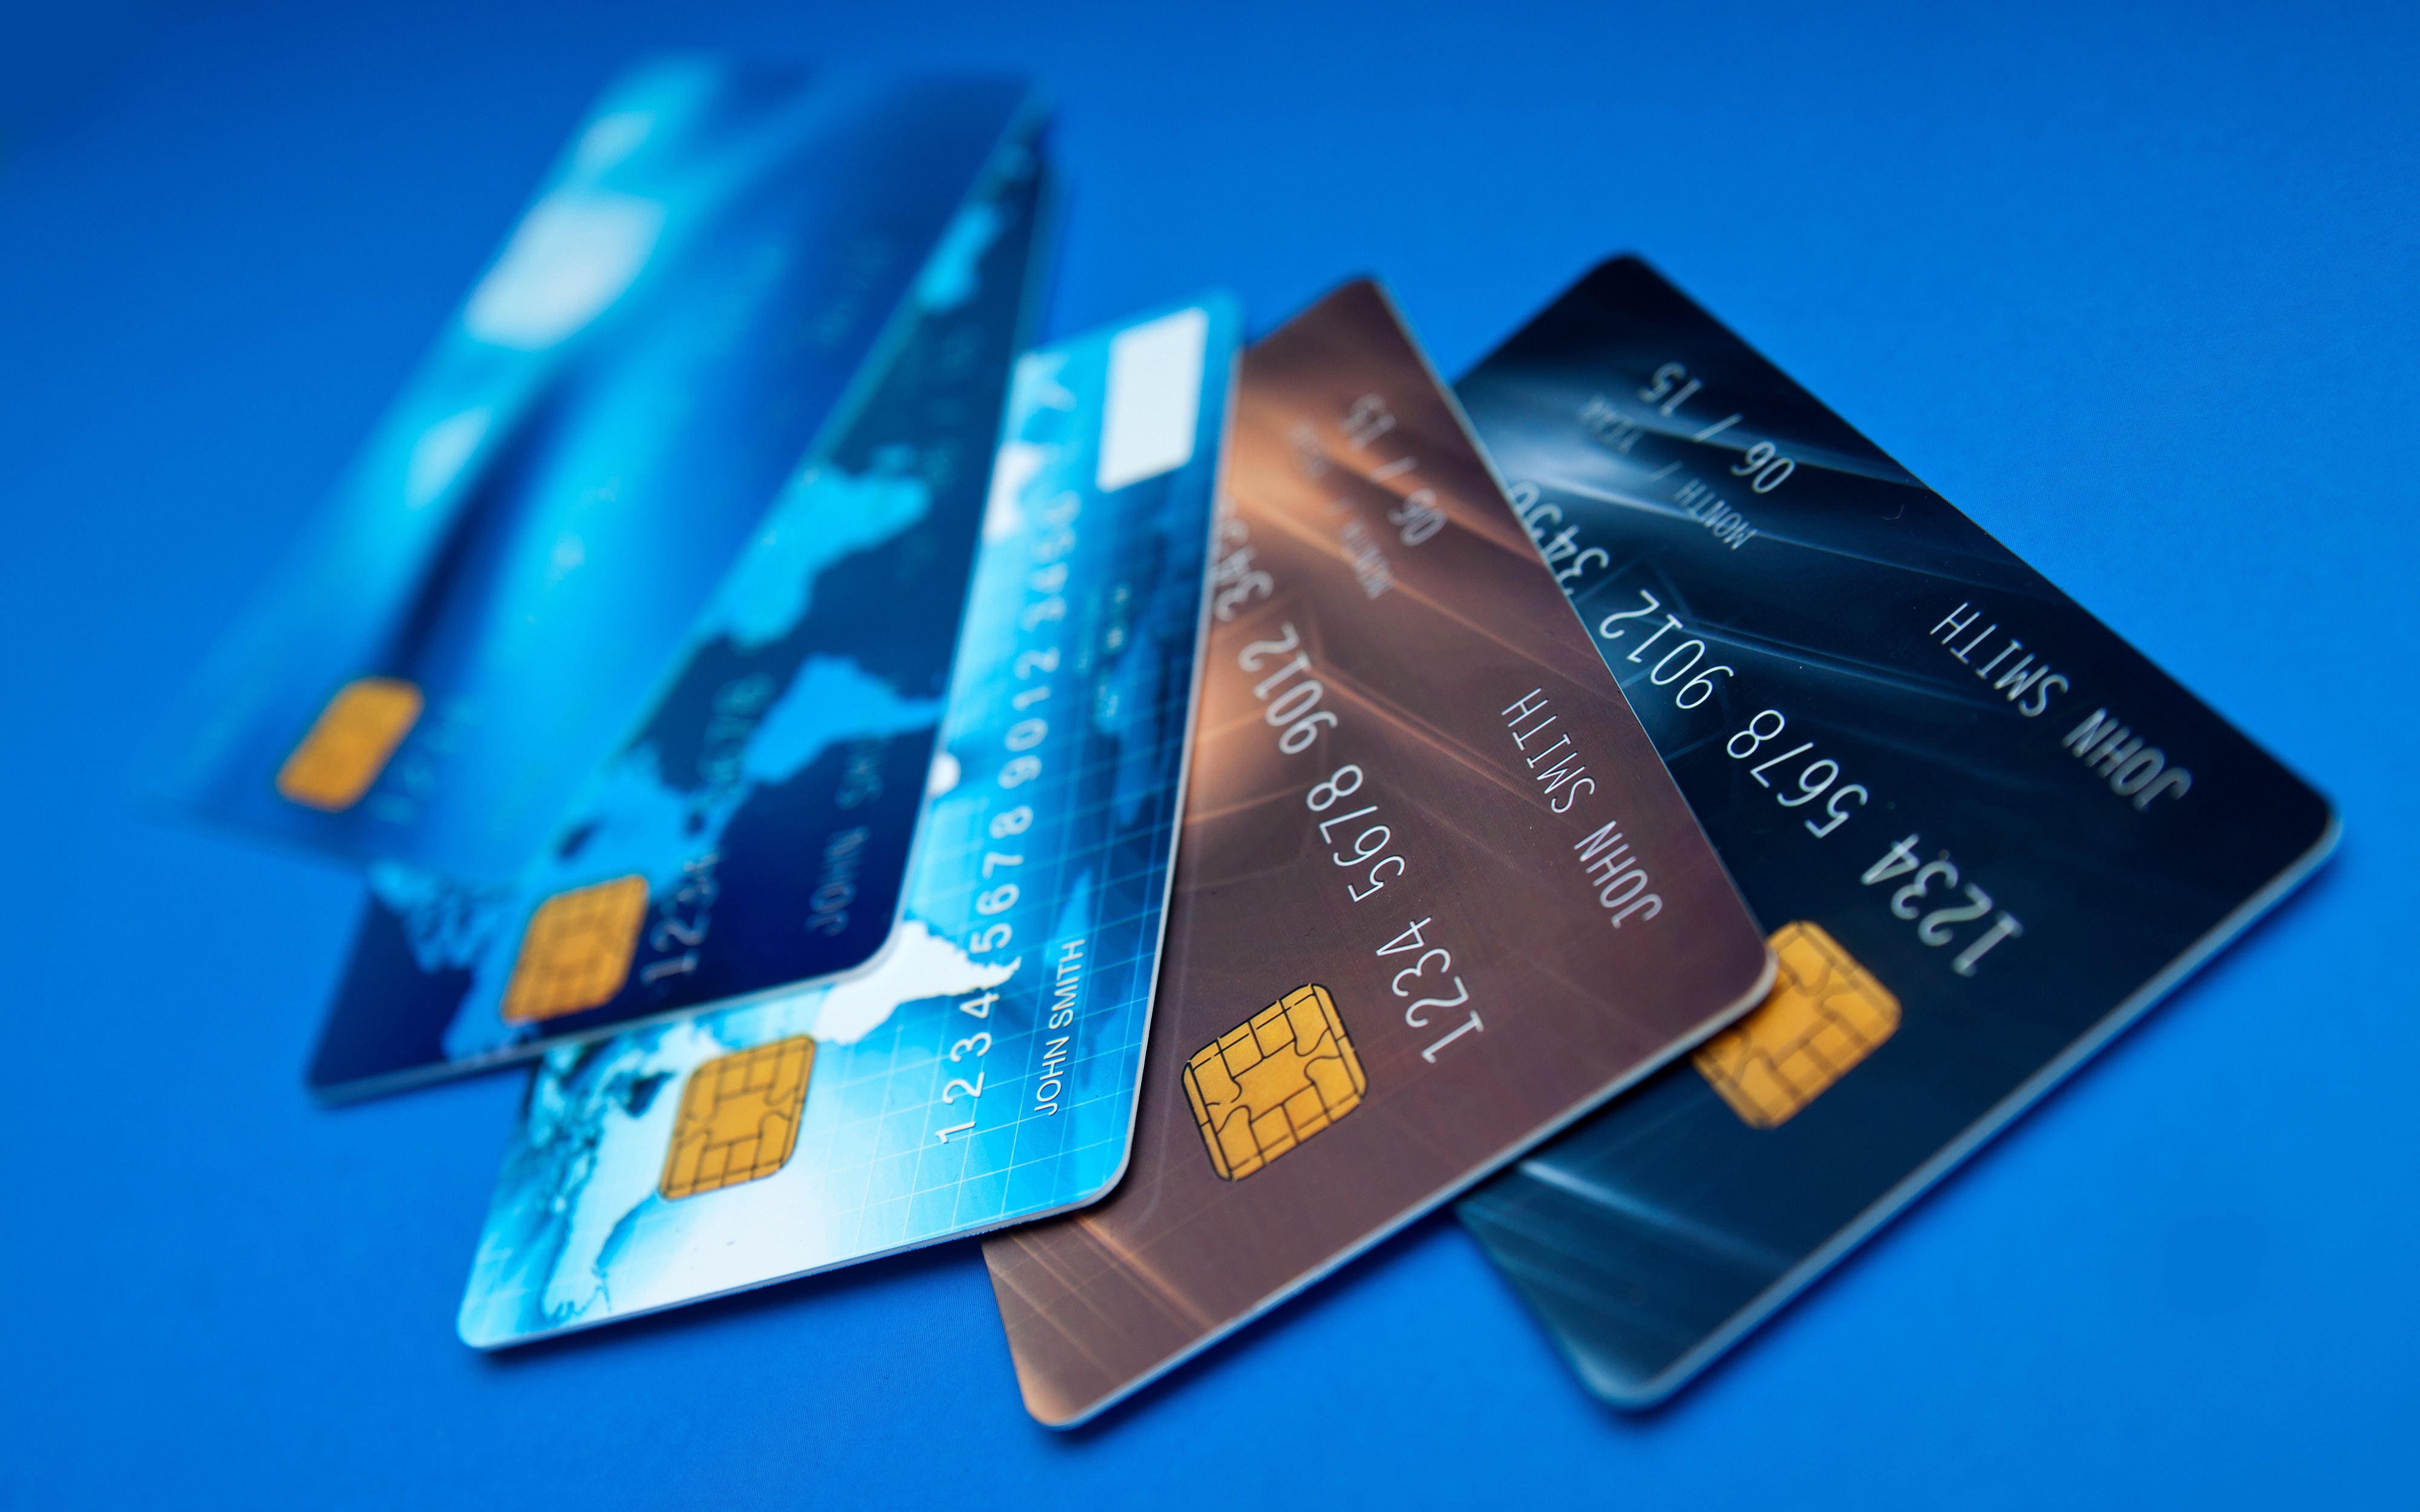 The Guide to Prepaid Cards